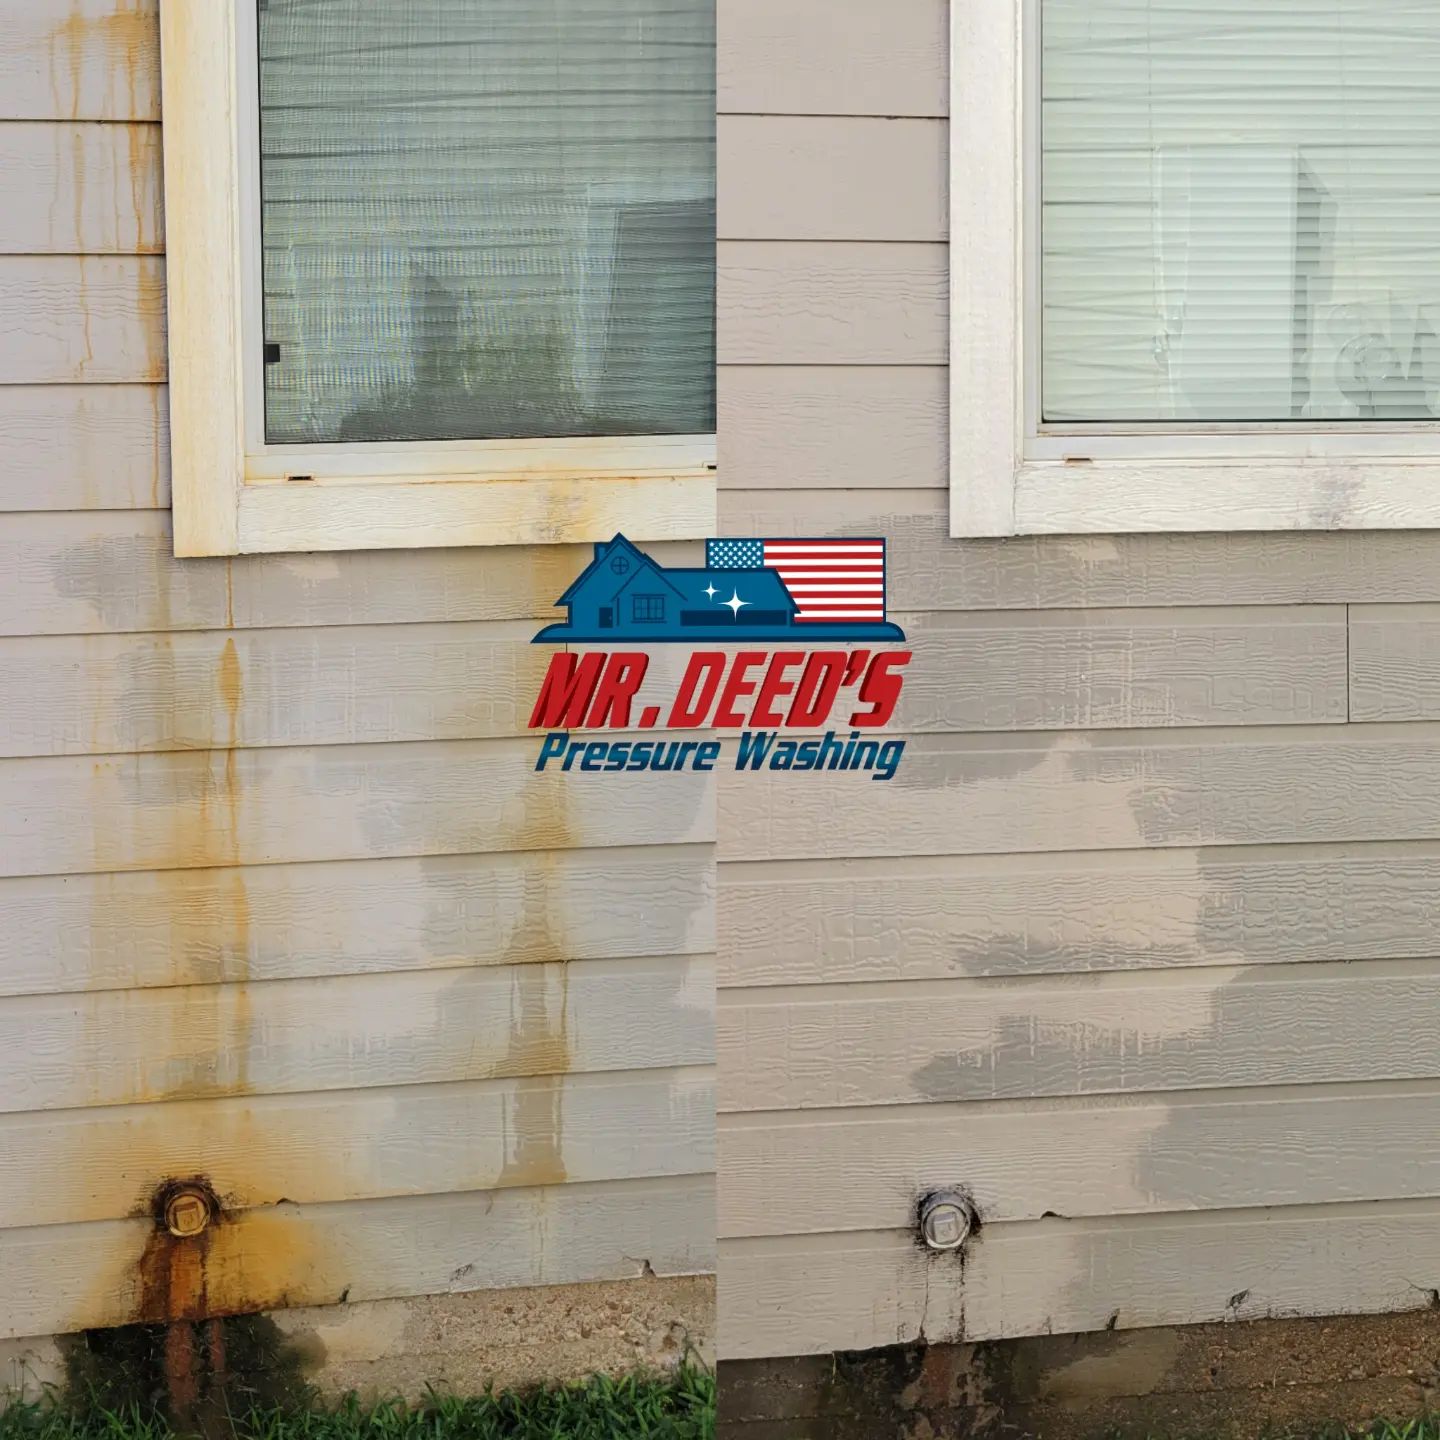 How do I get rid of rust stains around my property?